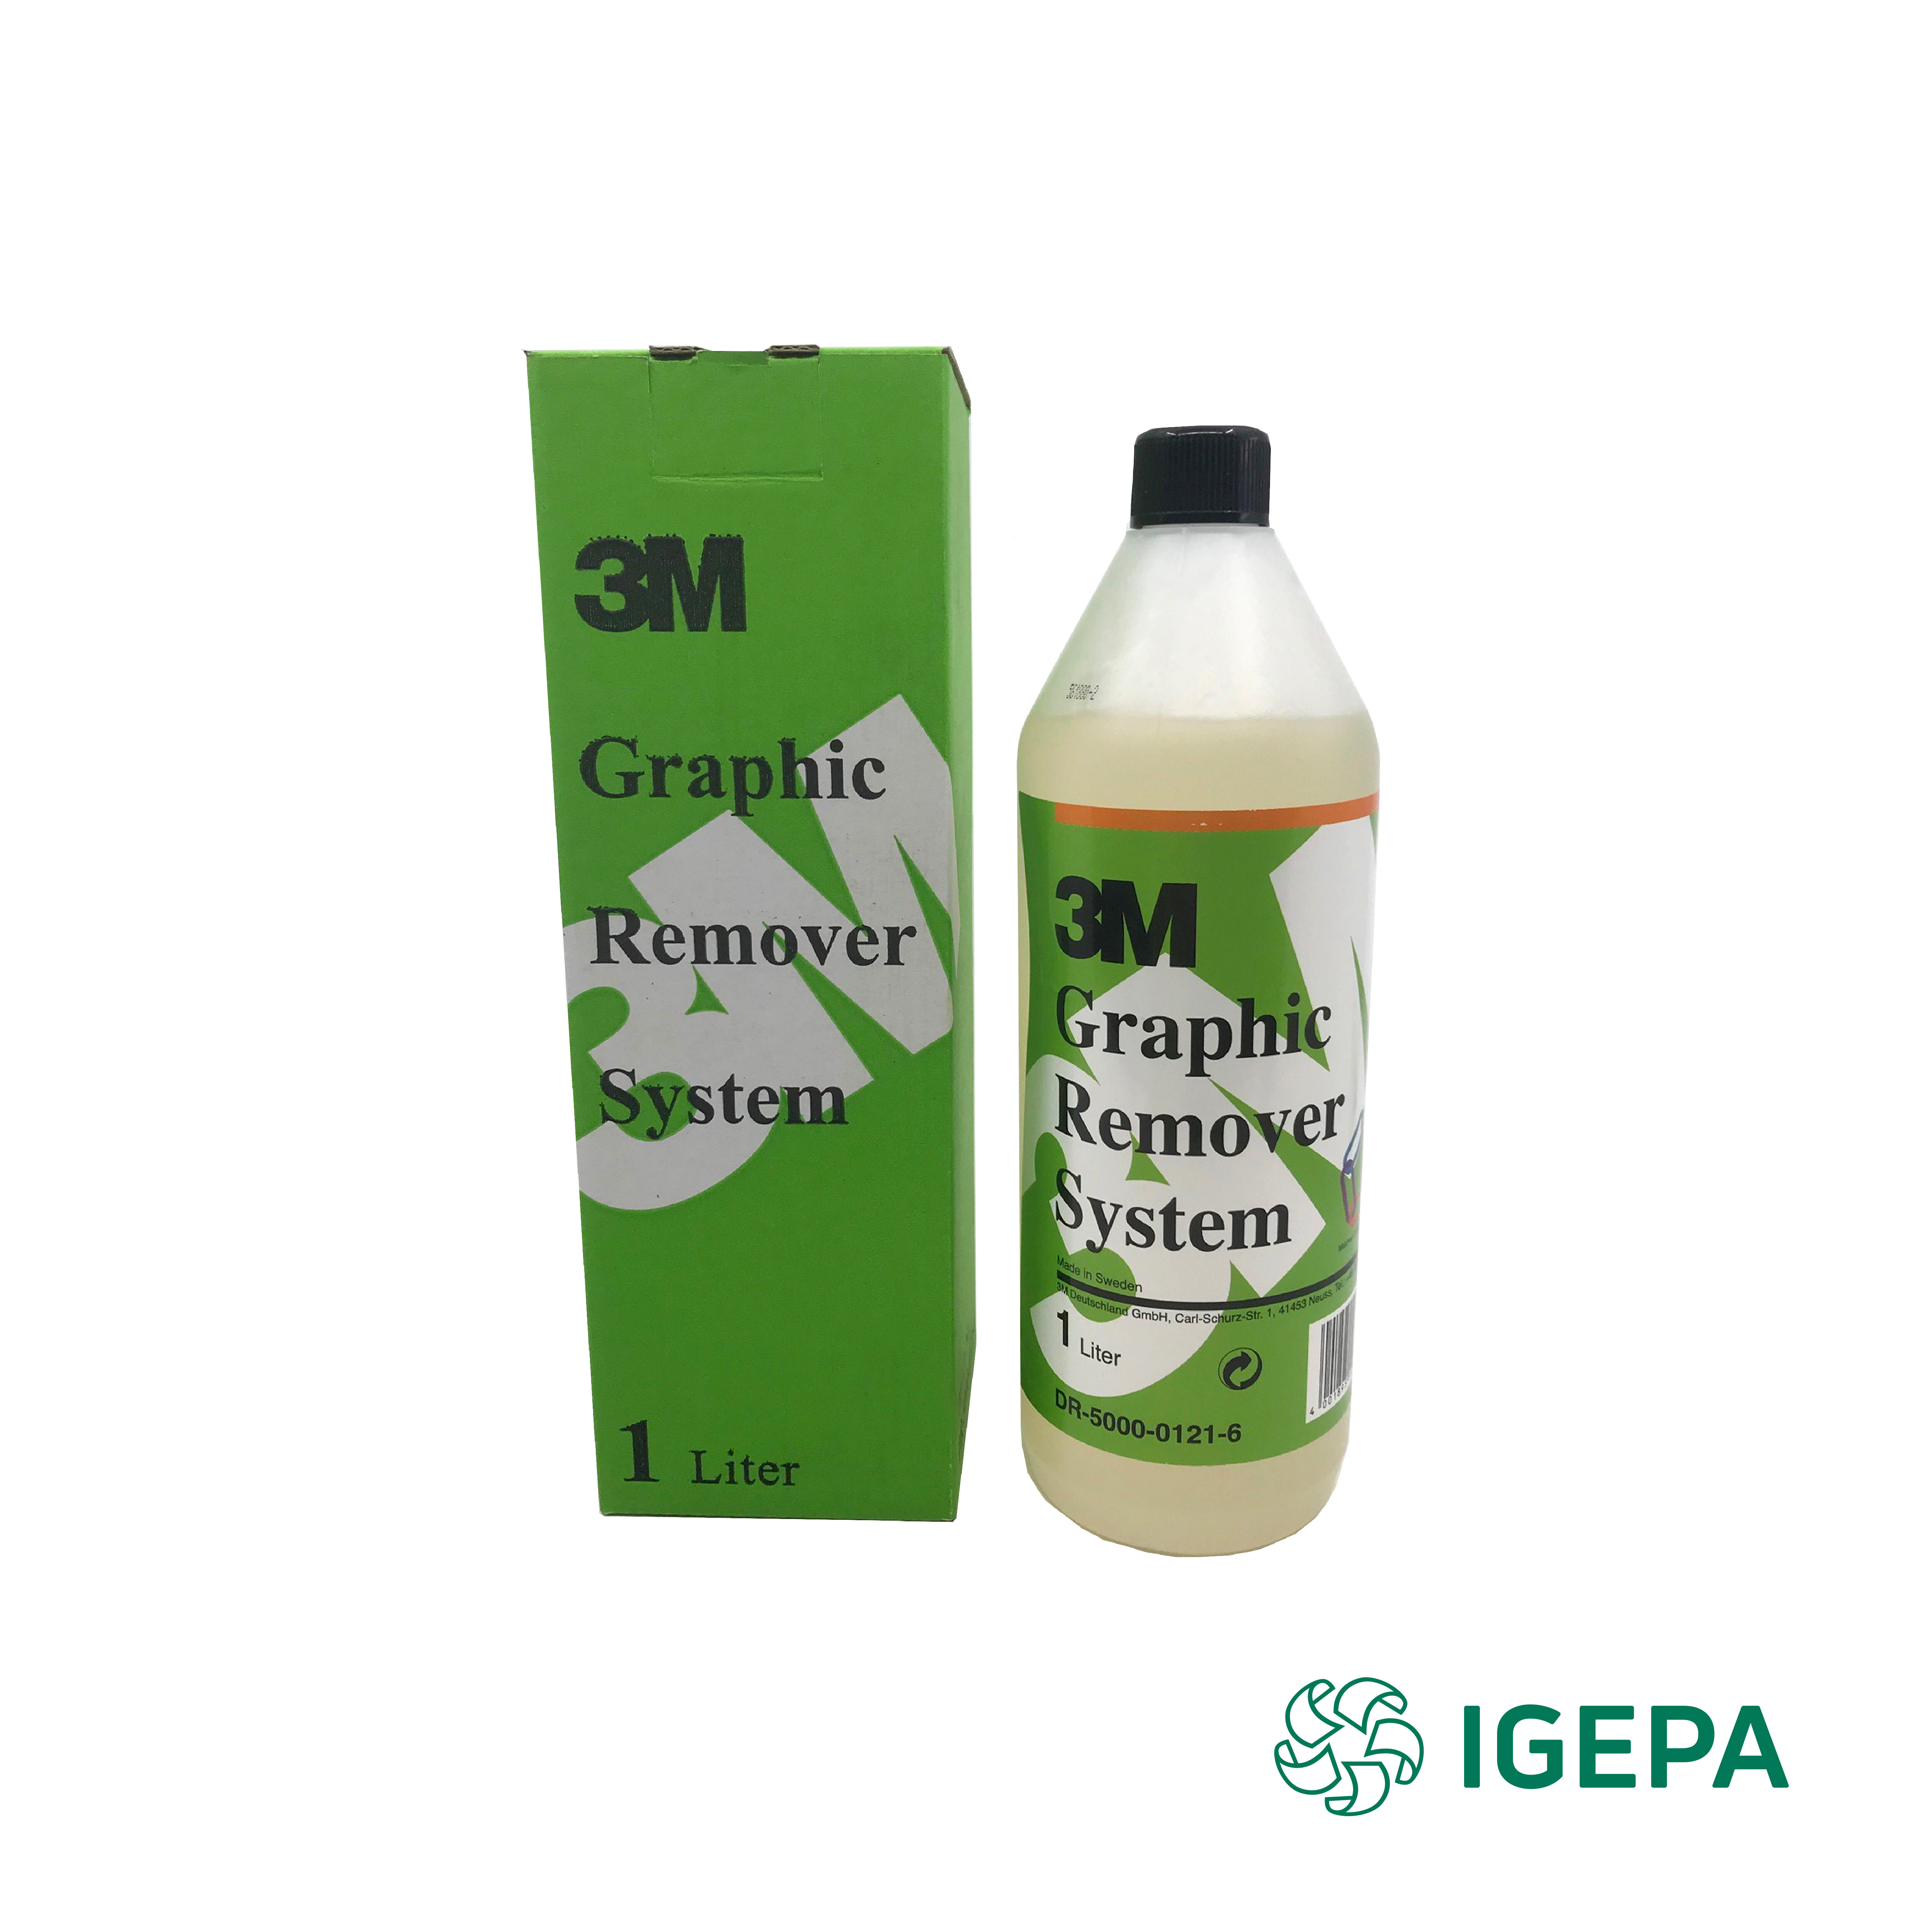 3M Graphic Remover System, 1L